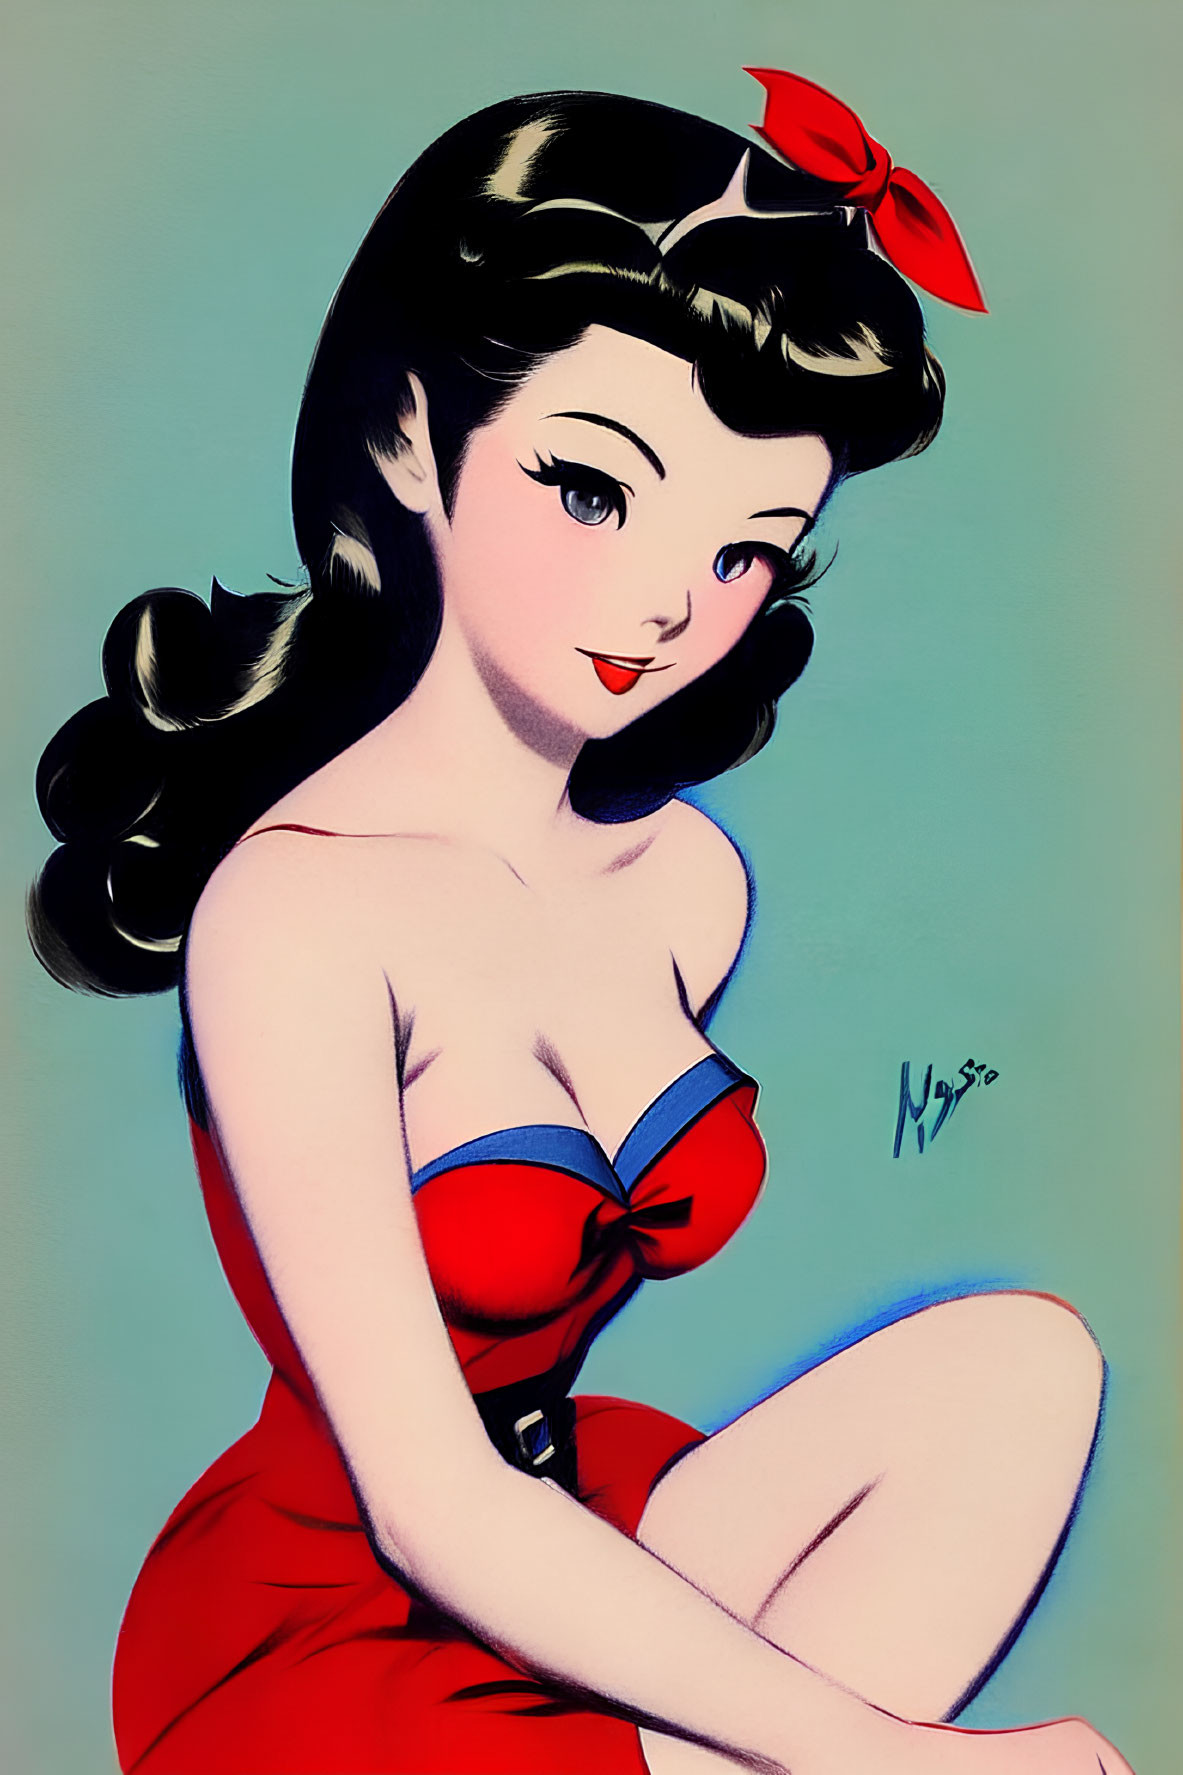 Retro-style animated woman with black hair in red bow and dress on teal background